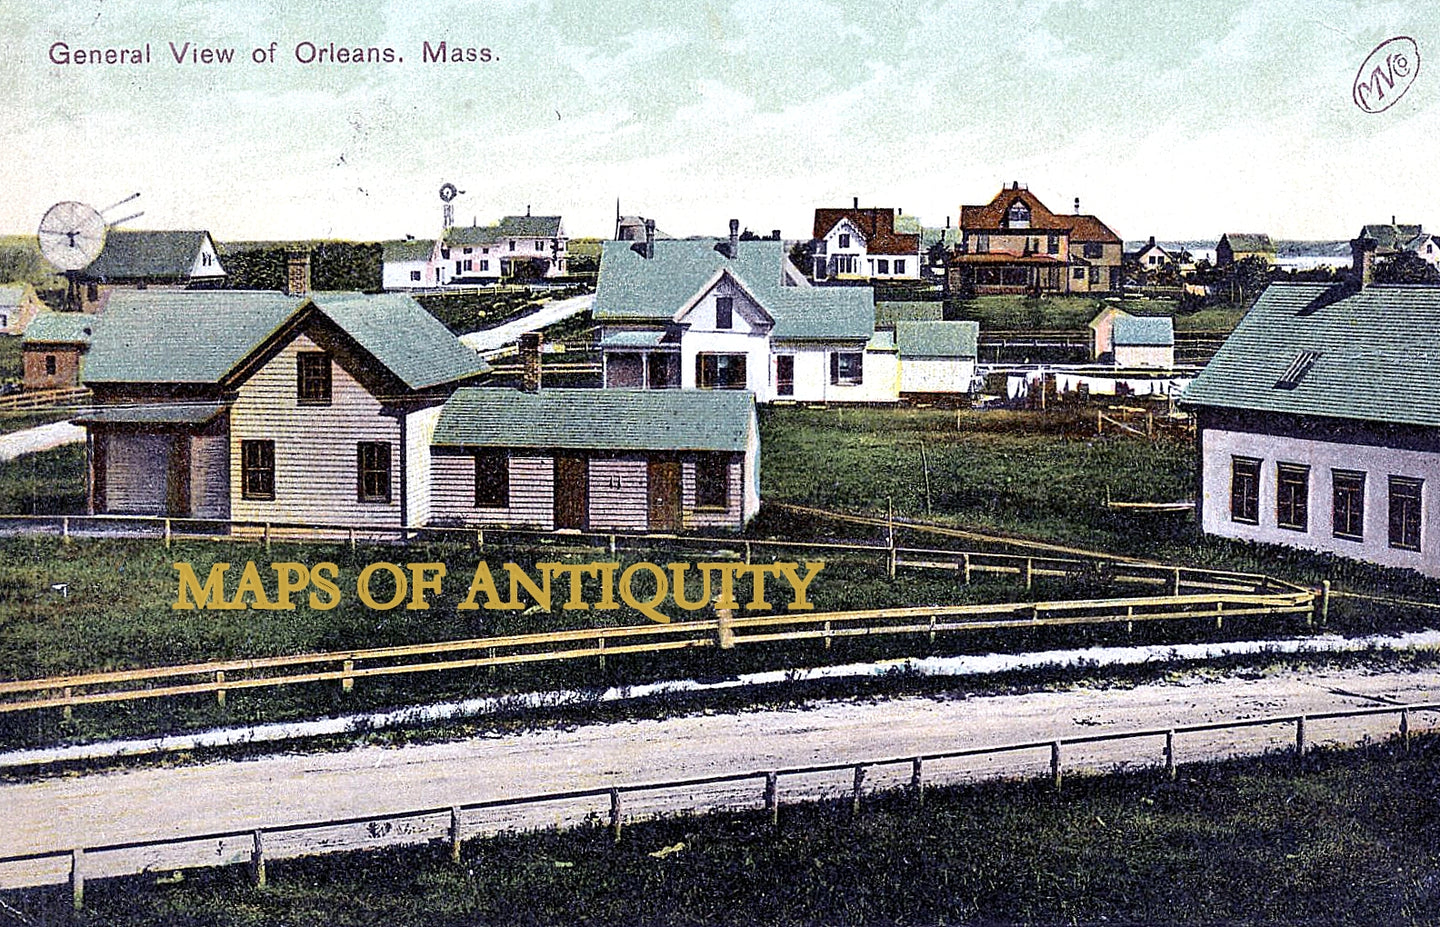 Antique-Postcard-General-View-of-Orleans-Mass.---Postcard-******-Antique-Postcards-Cape-Cod-and-Islands-1908-Robbins-Maps-Of-Antiquity